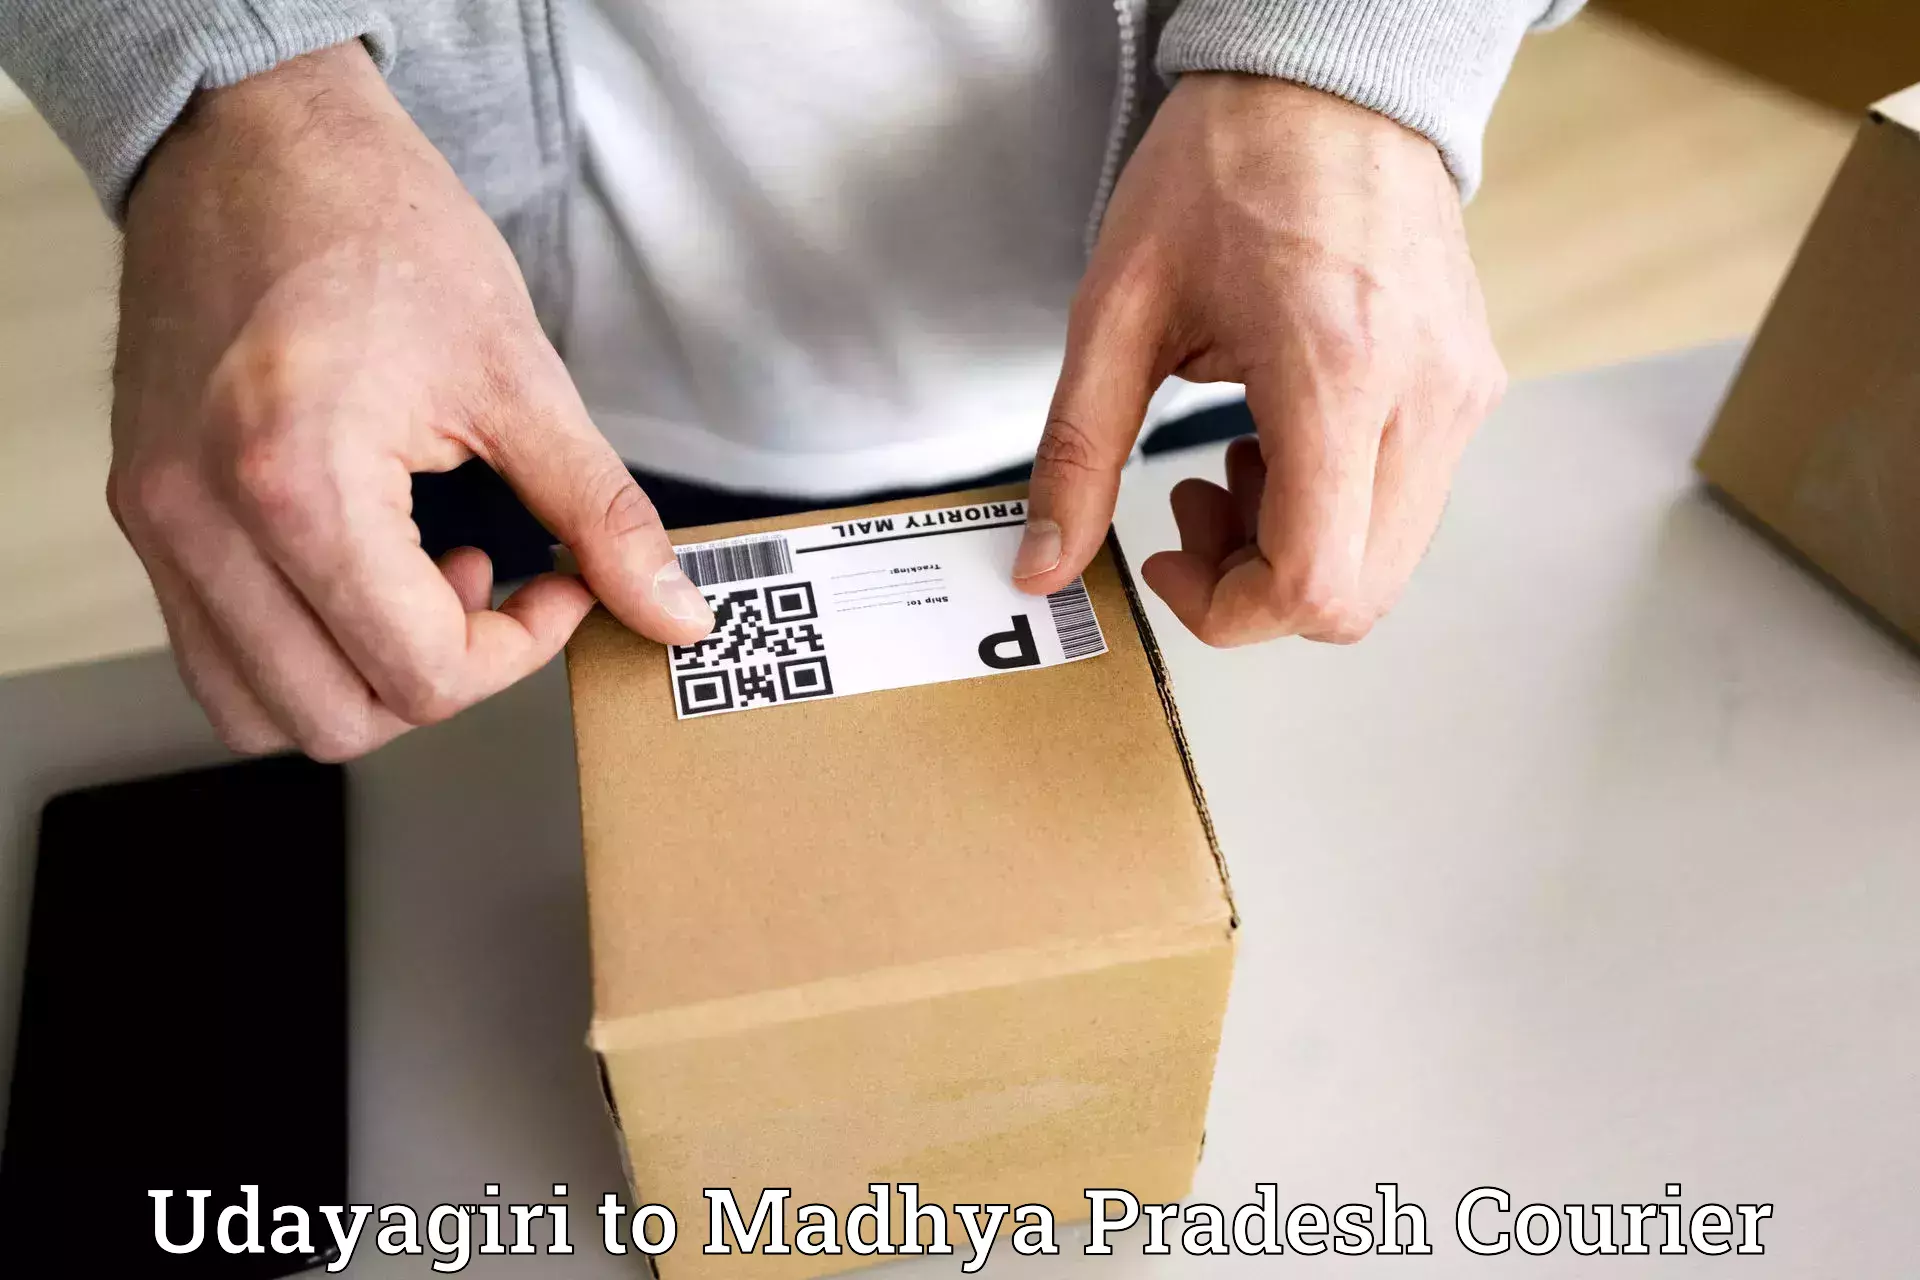 Next-day delivery options Udayagiri to Agar